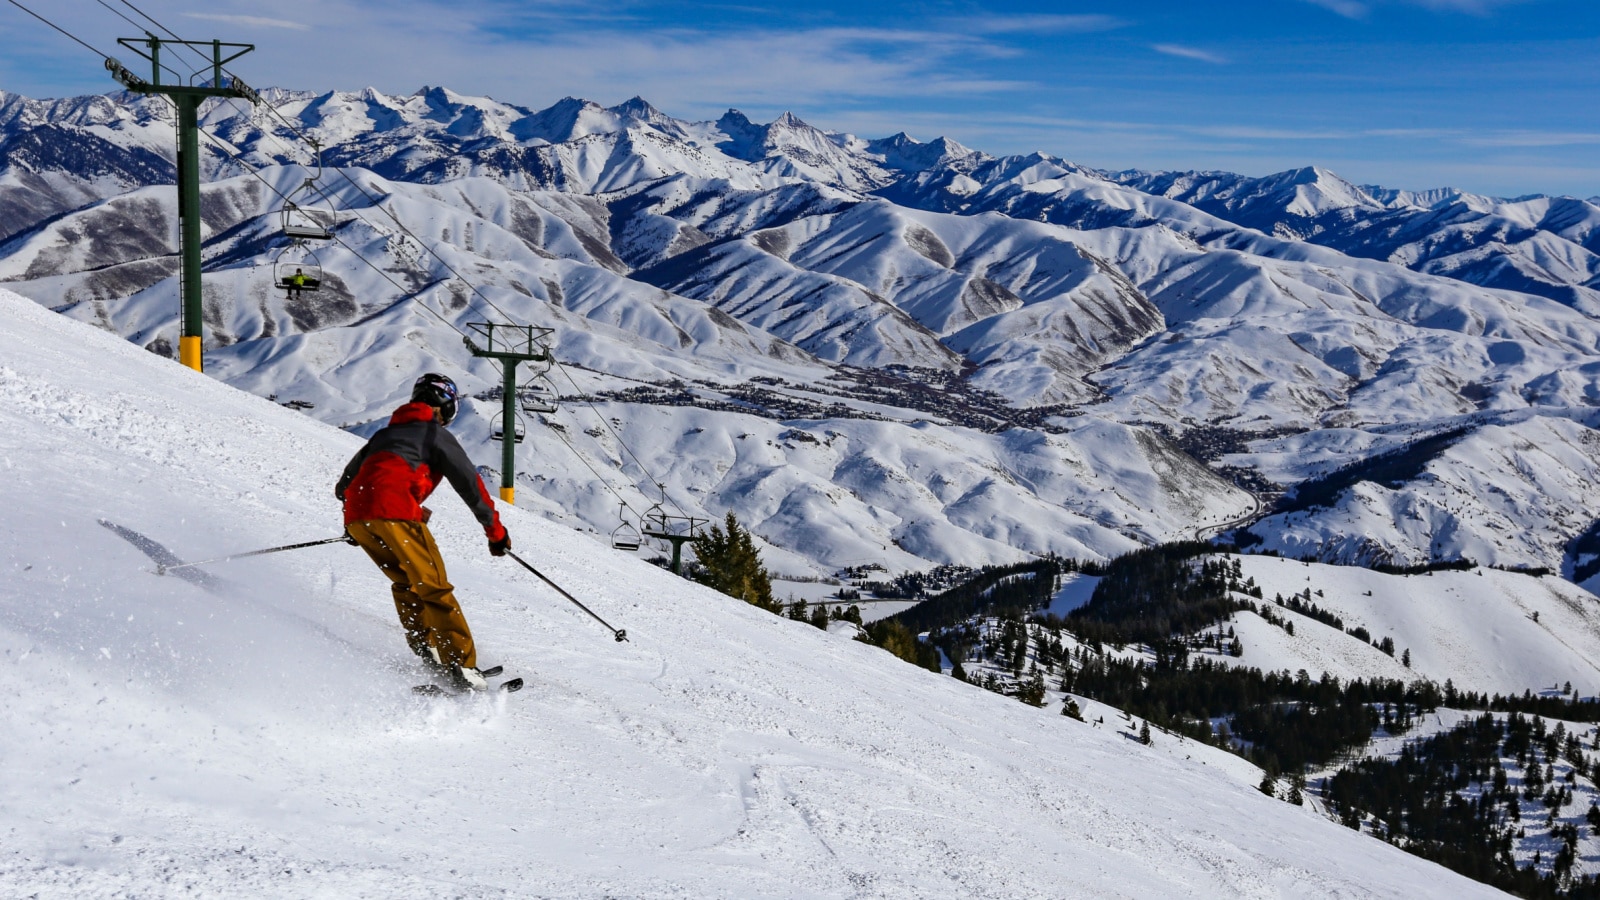 <p>Located in the mountain resort town of Sun Valley, this area is a must-visit for year-round outdoor adventures. It’s known for skiing, hiking, and a vibrant arts scene.</p>